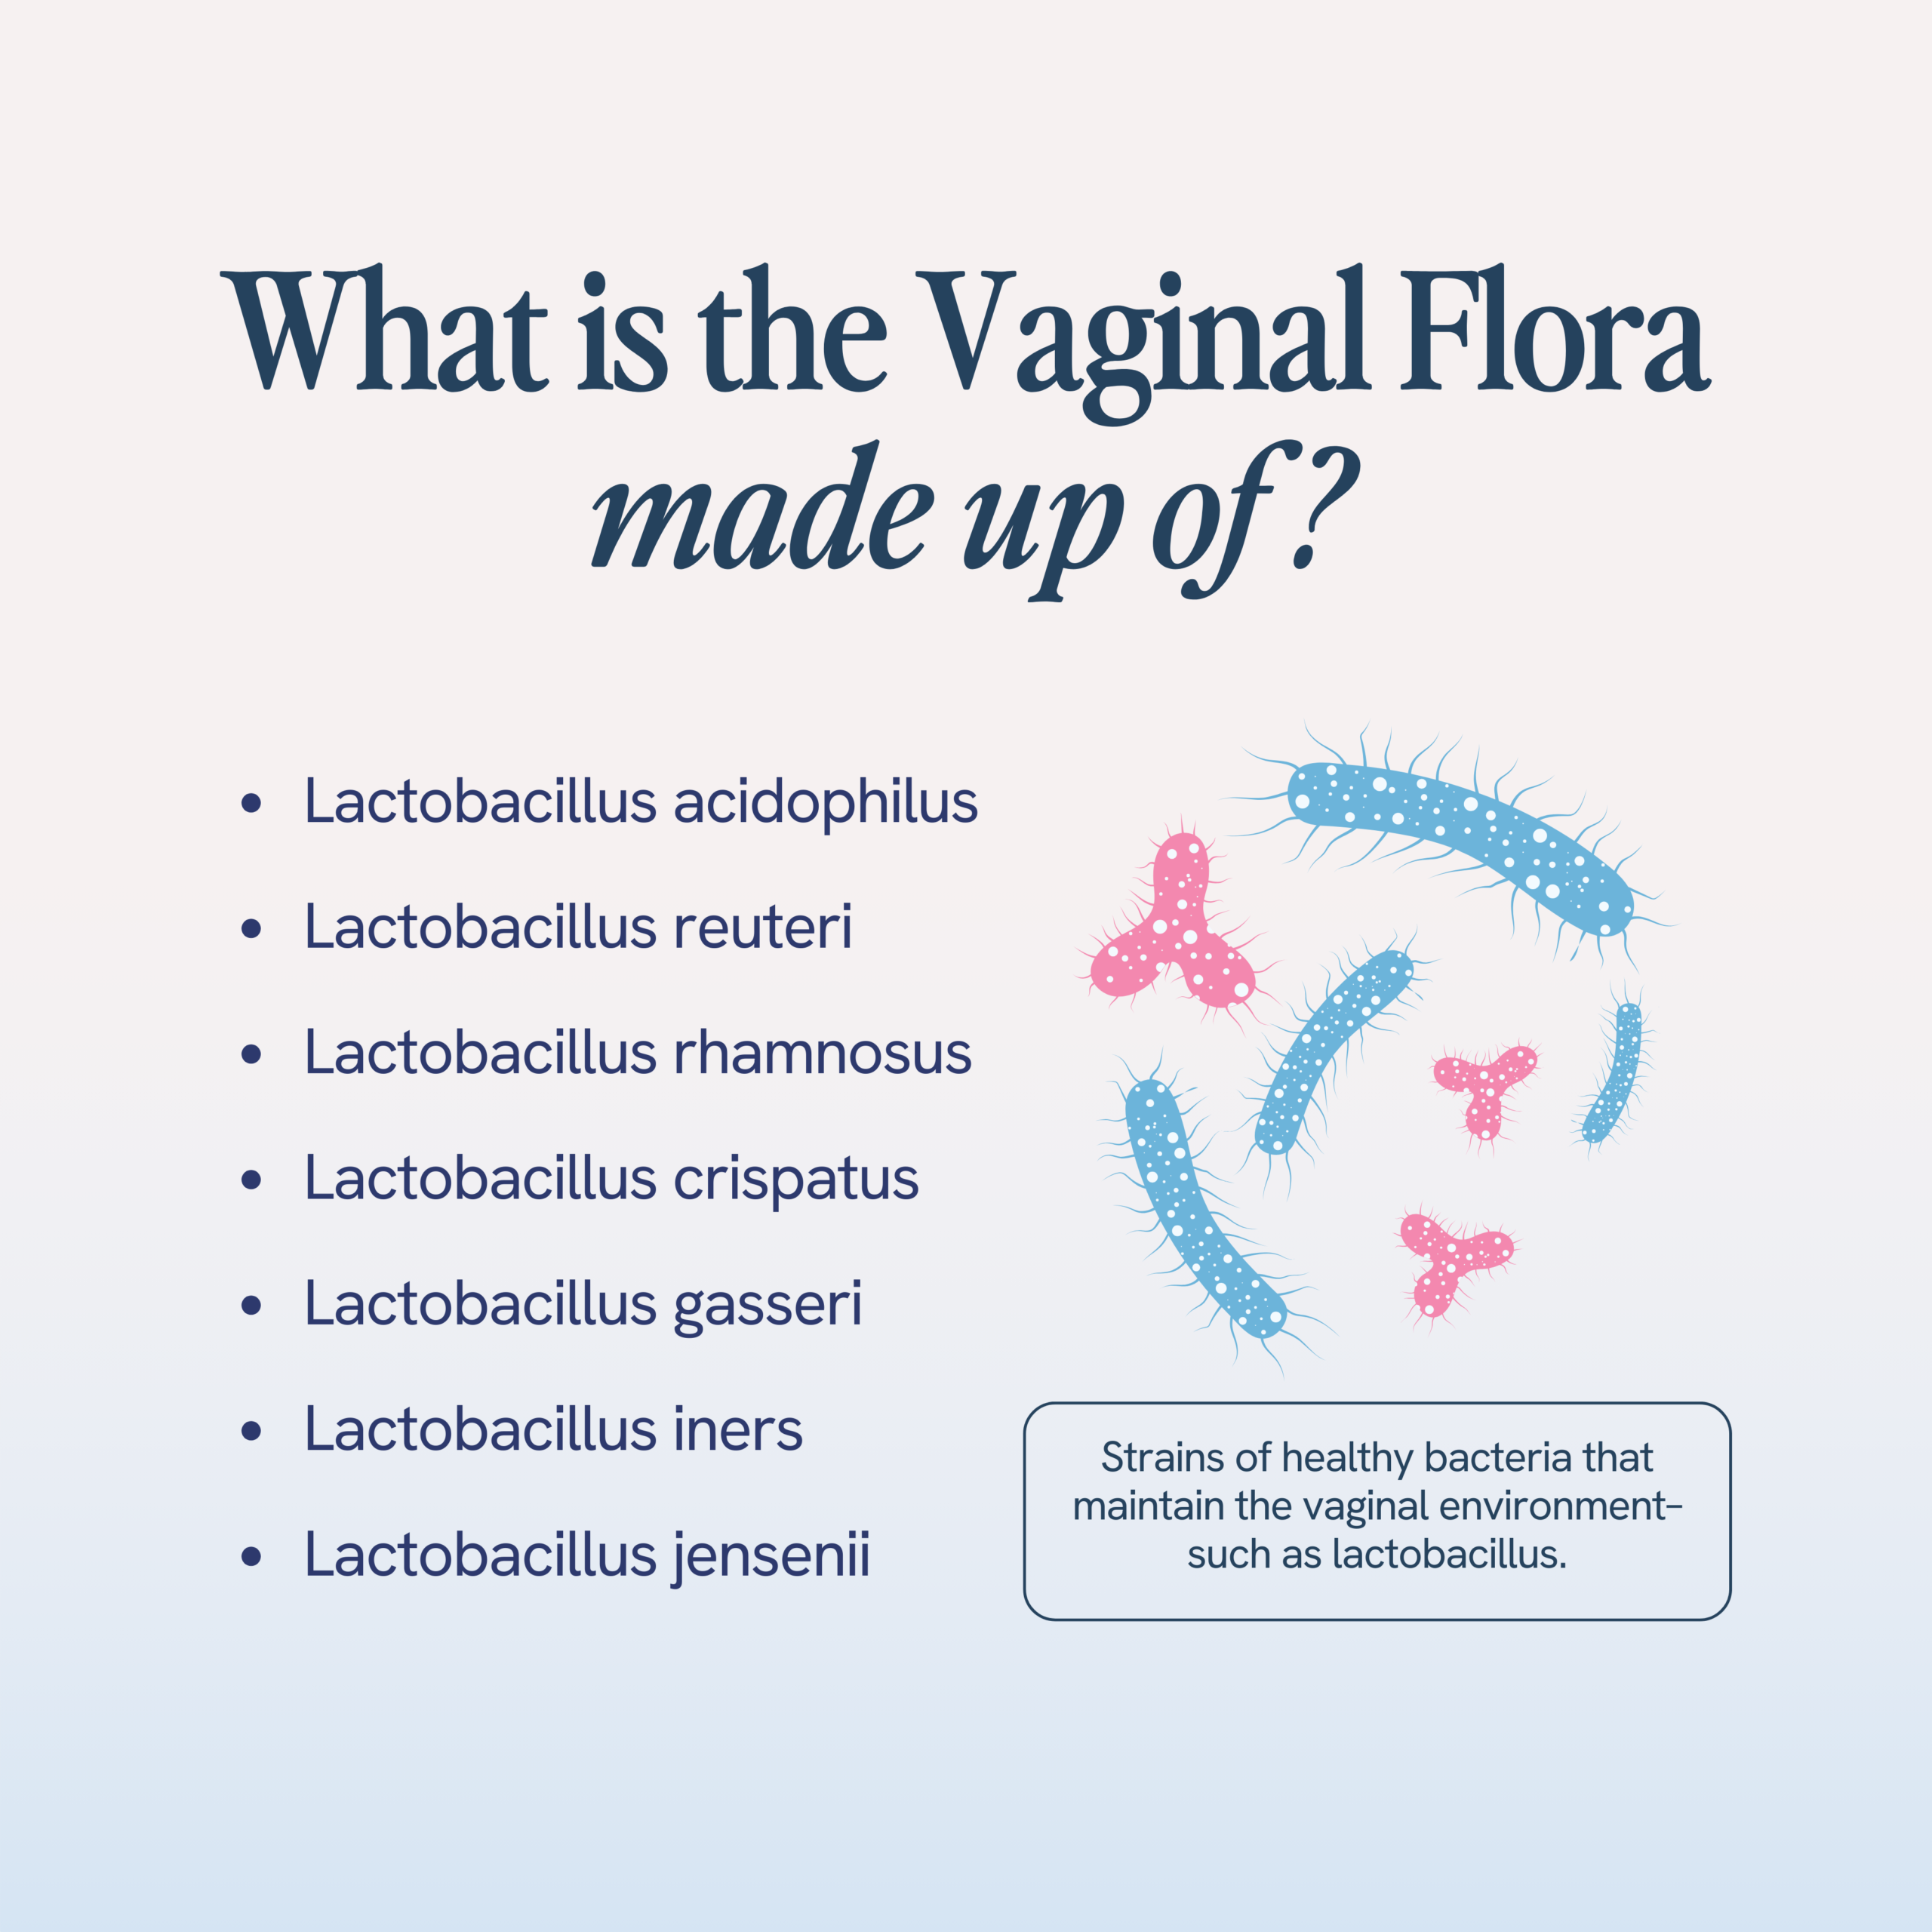 Educational image listing the components of the vaginal flora, including Lactobacillus acidophilus, Lactobacillus reuteri, Lactobacillus rhamnosus, Lactobacillus crispatus, Lactobacillus gasseri, Lactobacillus iners, and Lactobacillus jensenii, with illustrations of healthy bacterial strains.